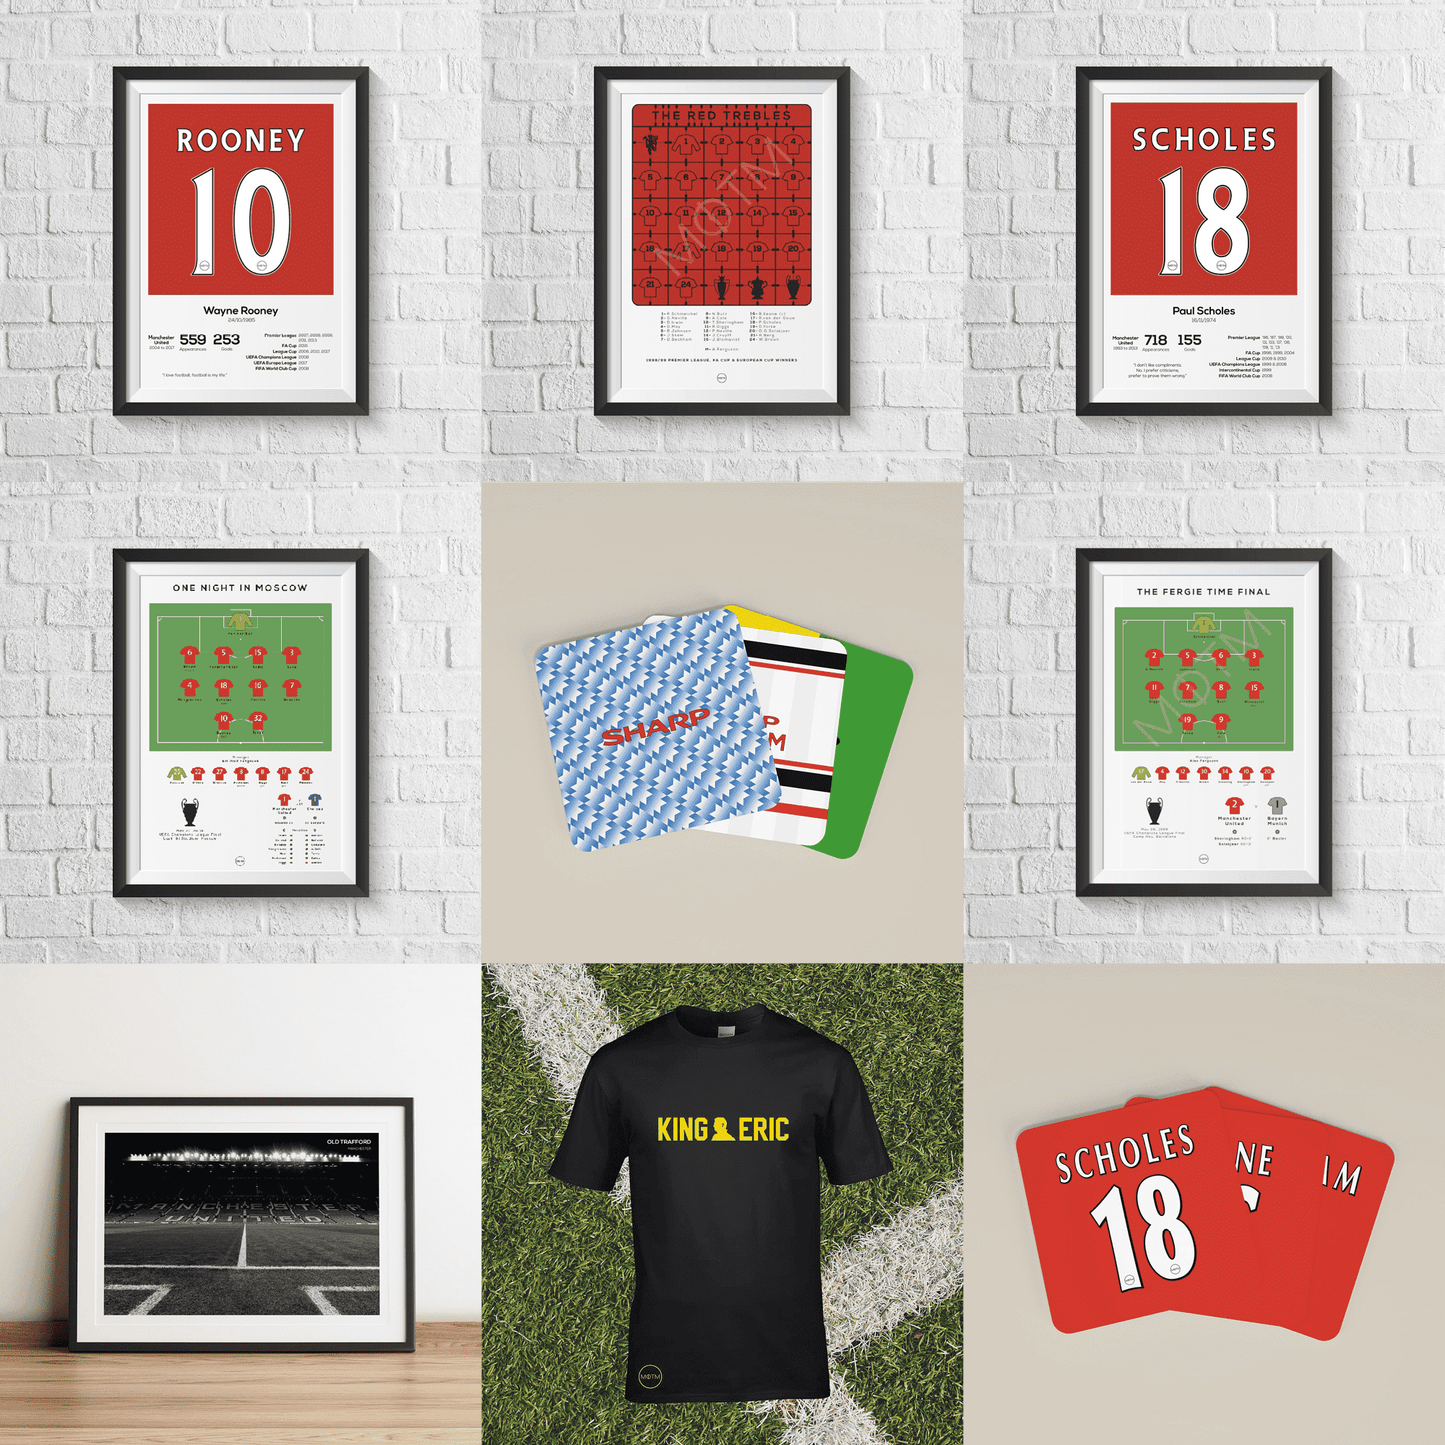 Roy Keane Manchester United Legend Stats Print - Man of The Match Football